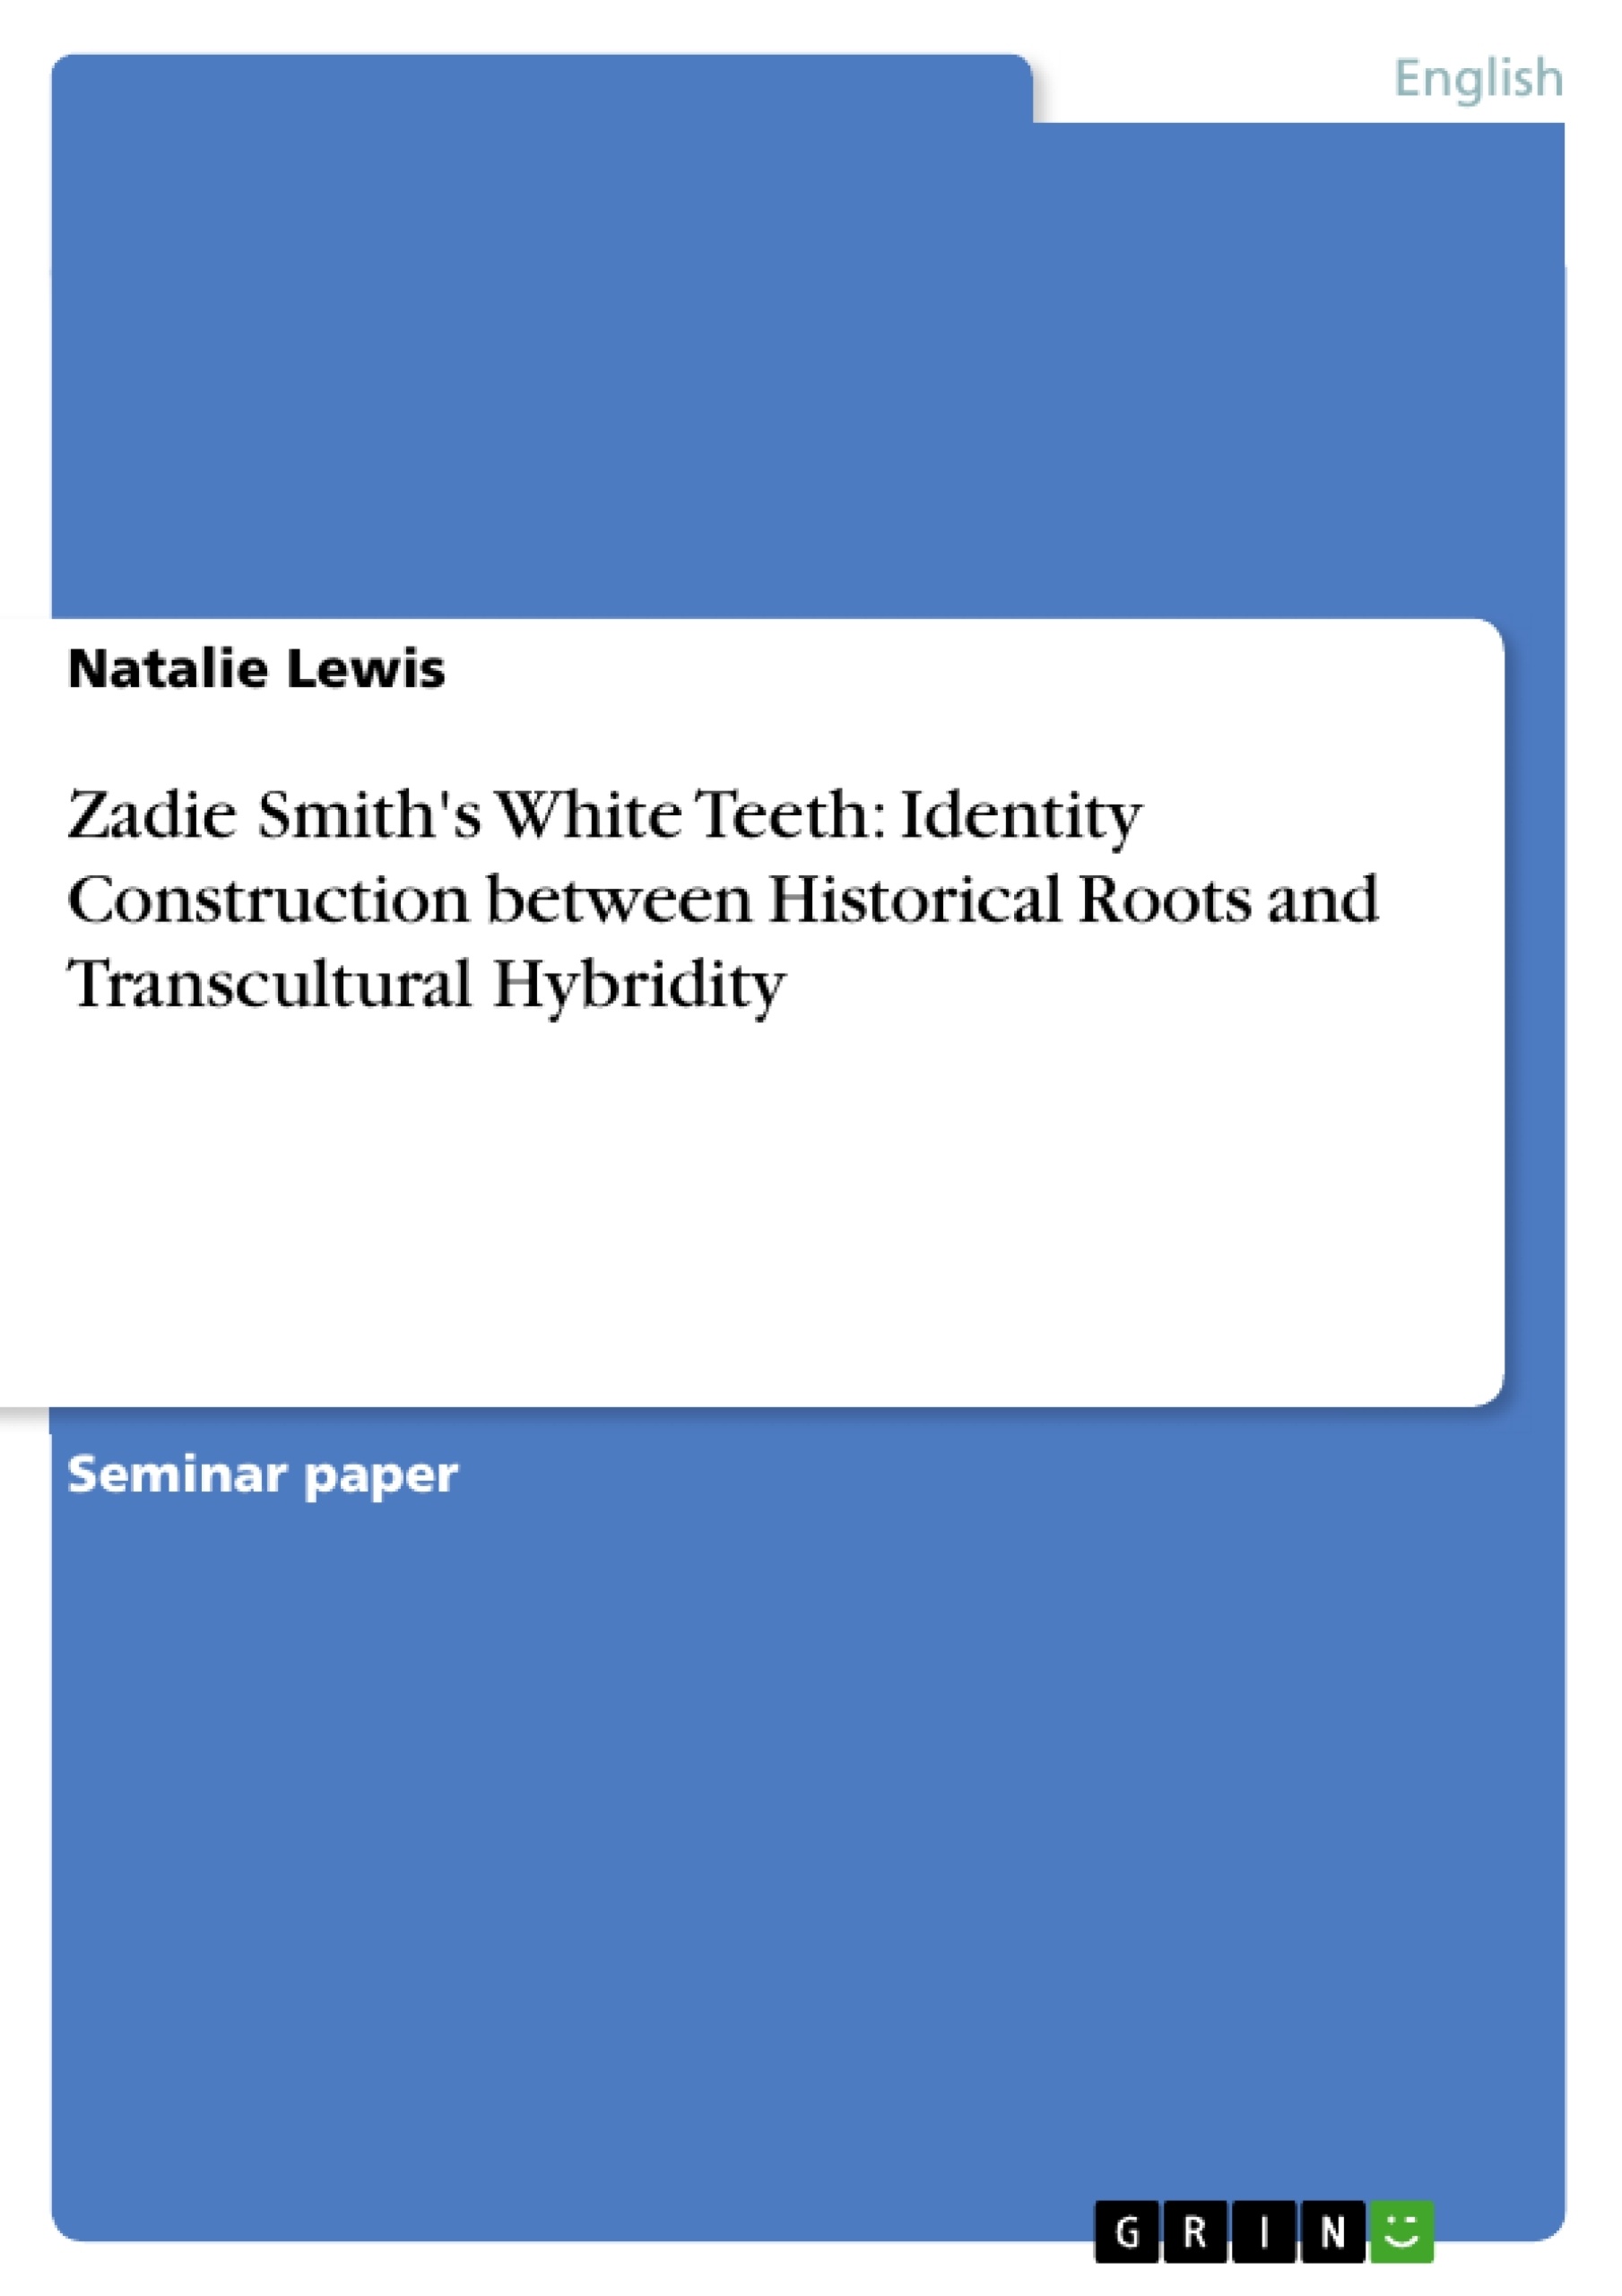 Title: Zadie Smith's White Teeth: Identity Construction between Historical Roots and Transcultural Hybridity